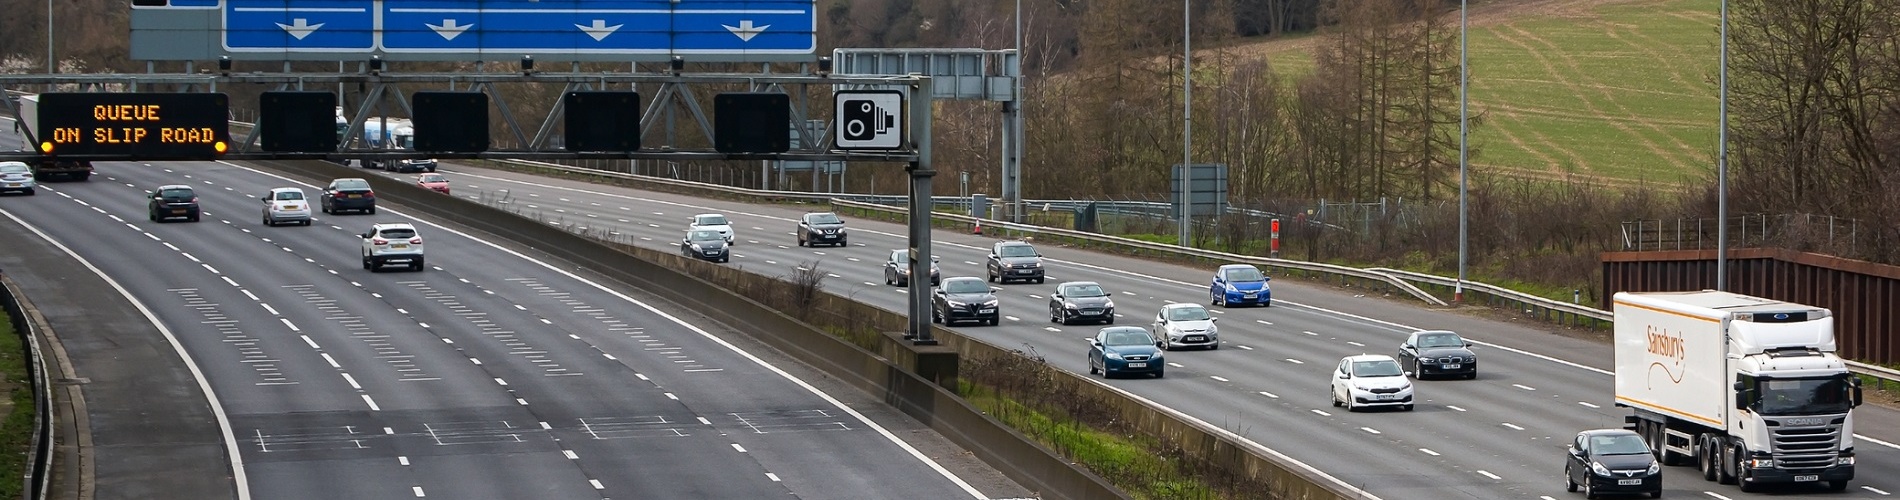 Government plans announced to tackle smart motorway safety concerns